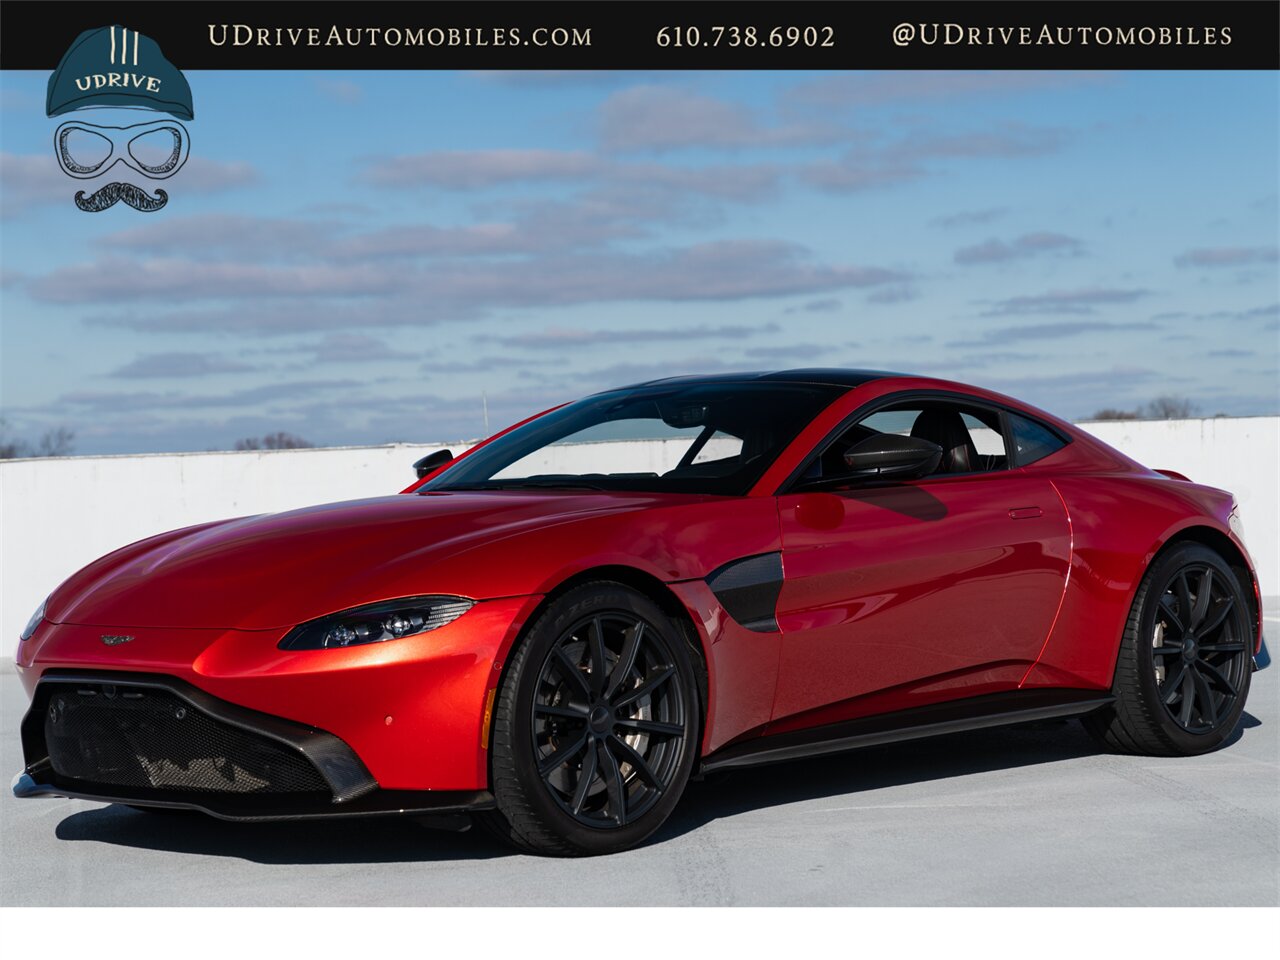 2019 Aston Martin Vantage  Incredibly Spec Rare Q Exclusive Fiamma Red $222k MSRP 1 of a Kind CPO - Photo 12 - West Chester, PA 19382